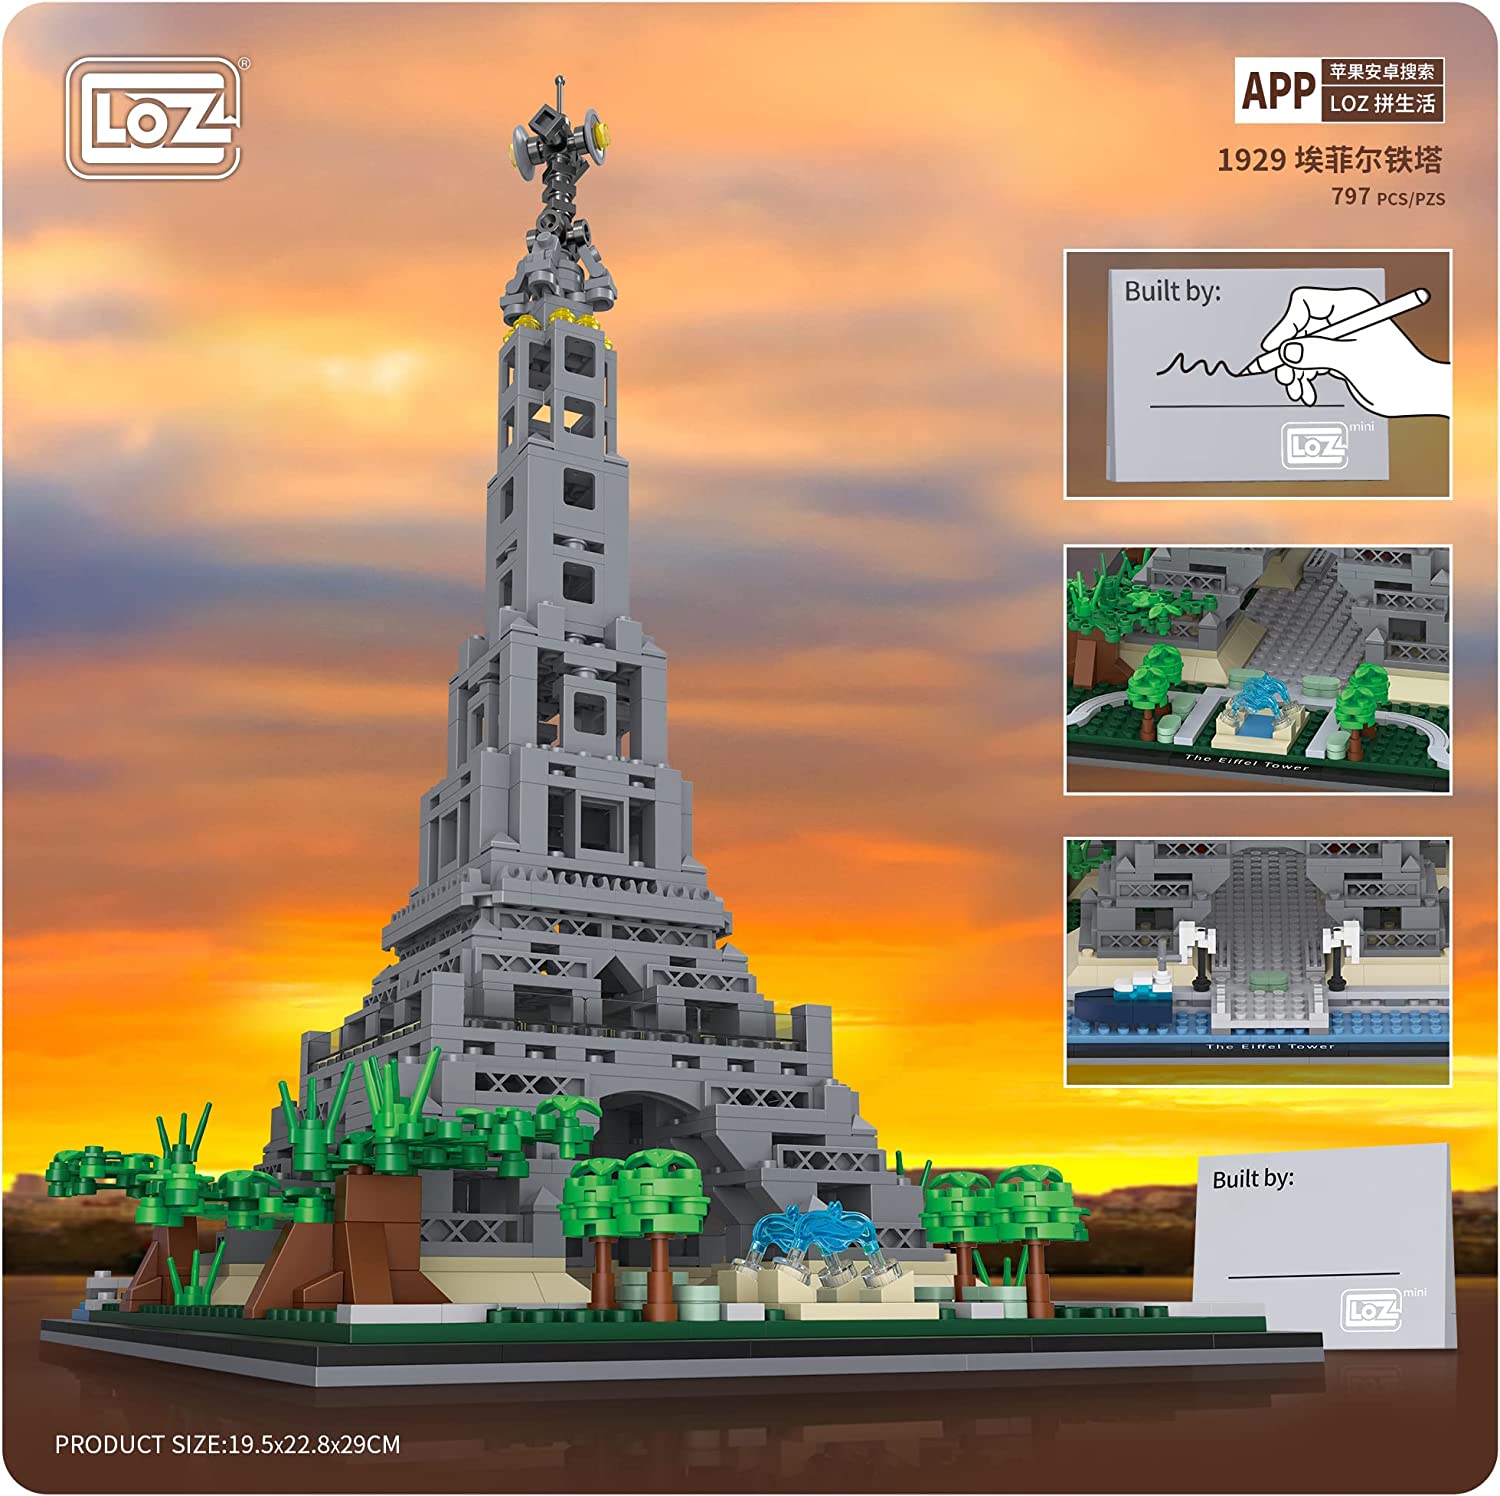 LOZ Micro Mini Blocks Eiffel Tower Building and Architecture Model Set,797 Piece Mini Bricks Toy,Famous Architecture Toys Gifts for Kid and Adult